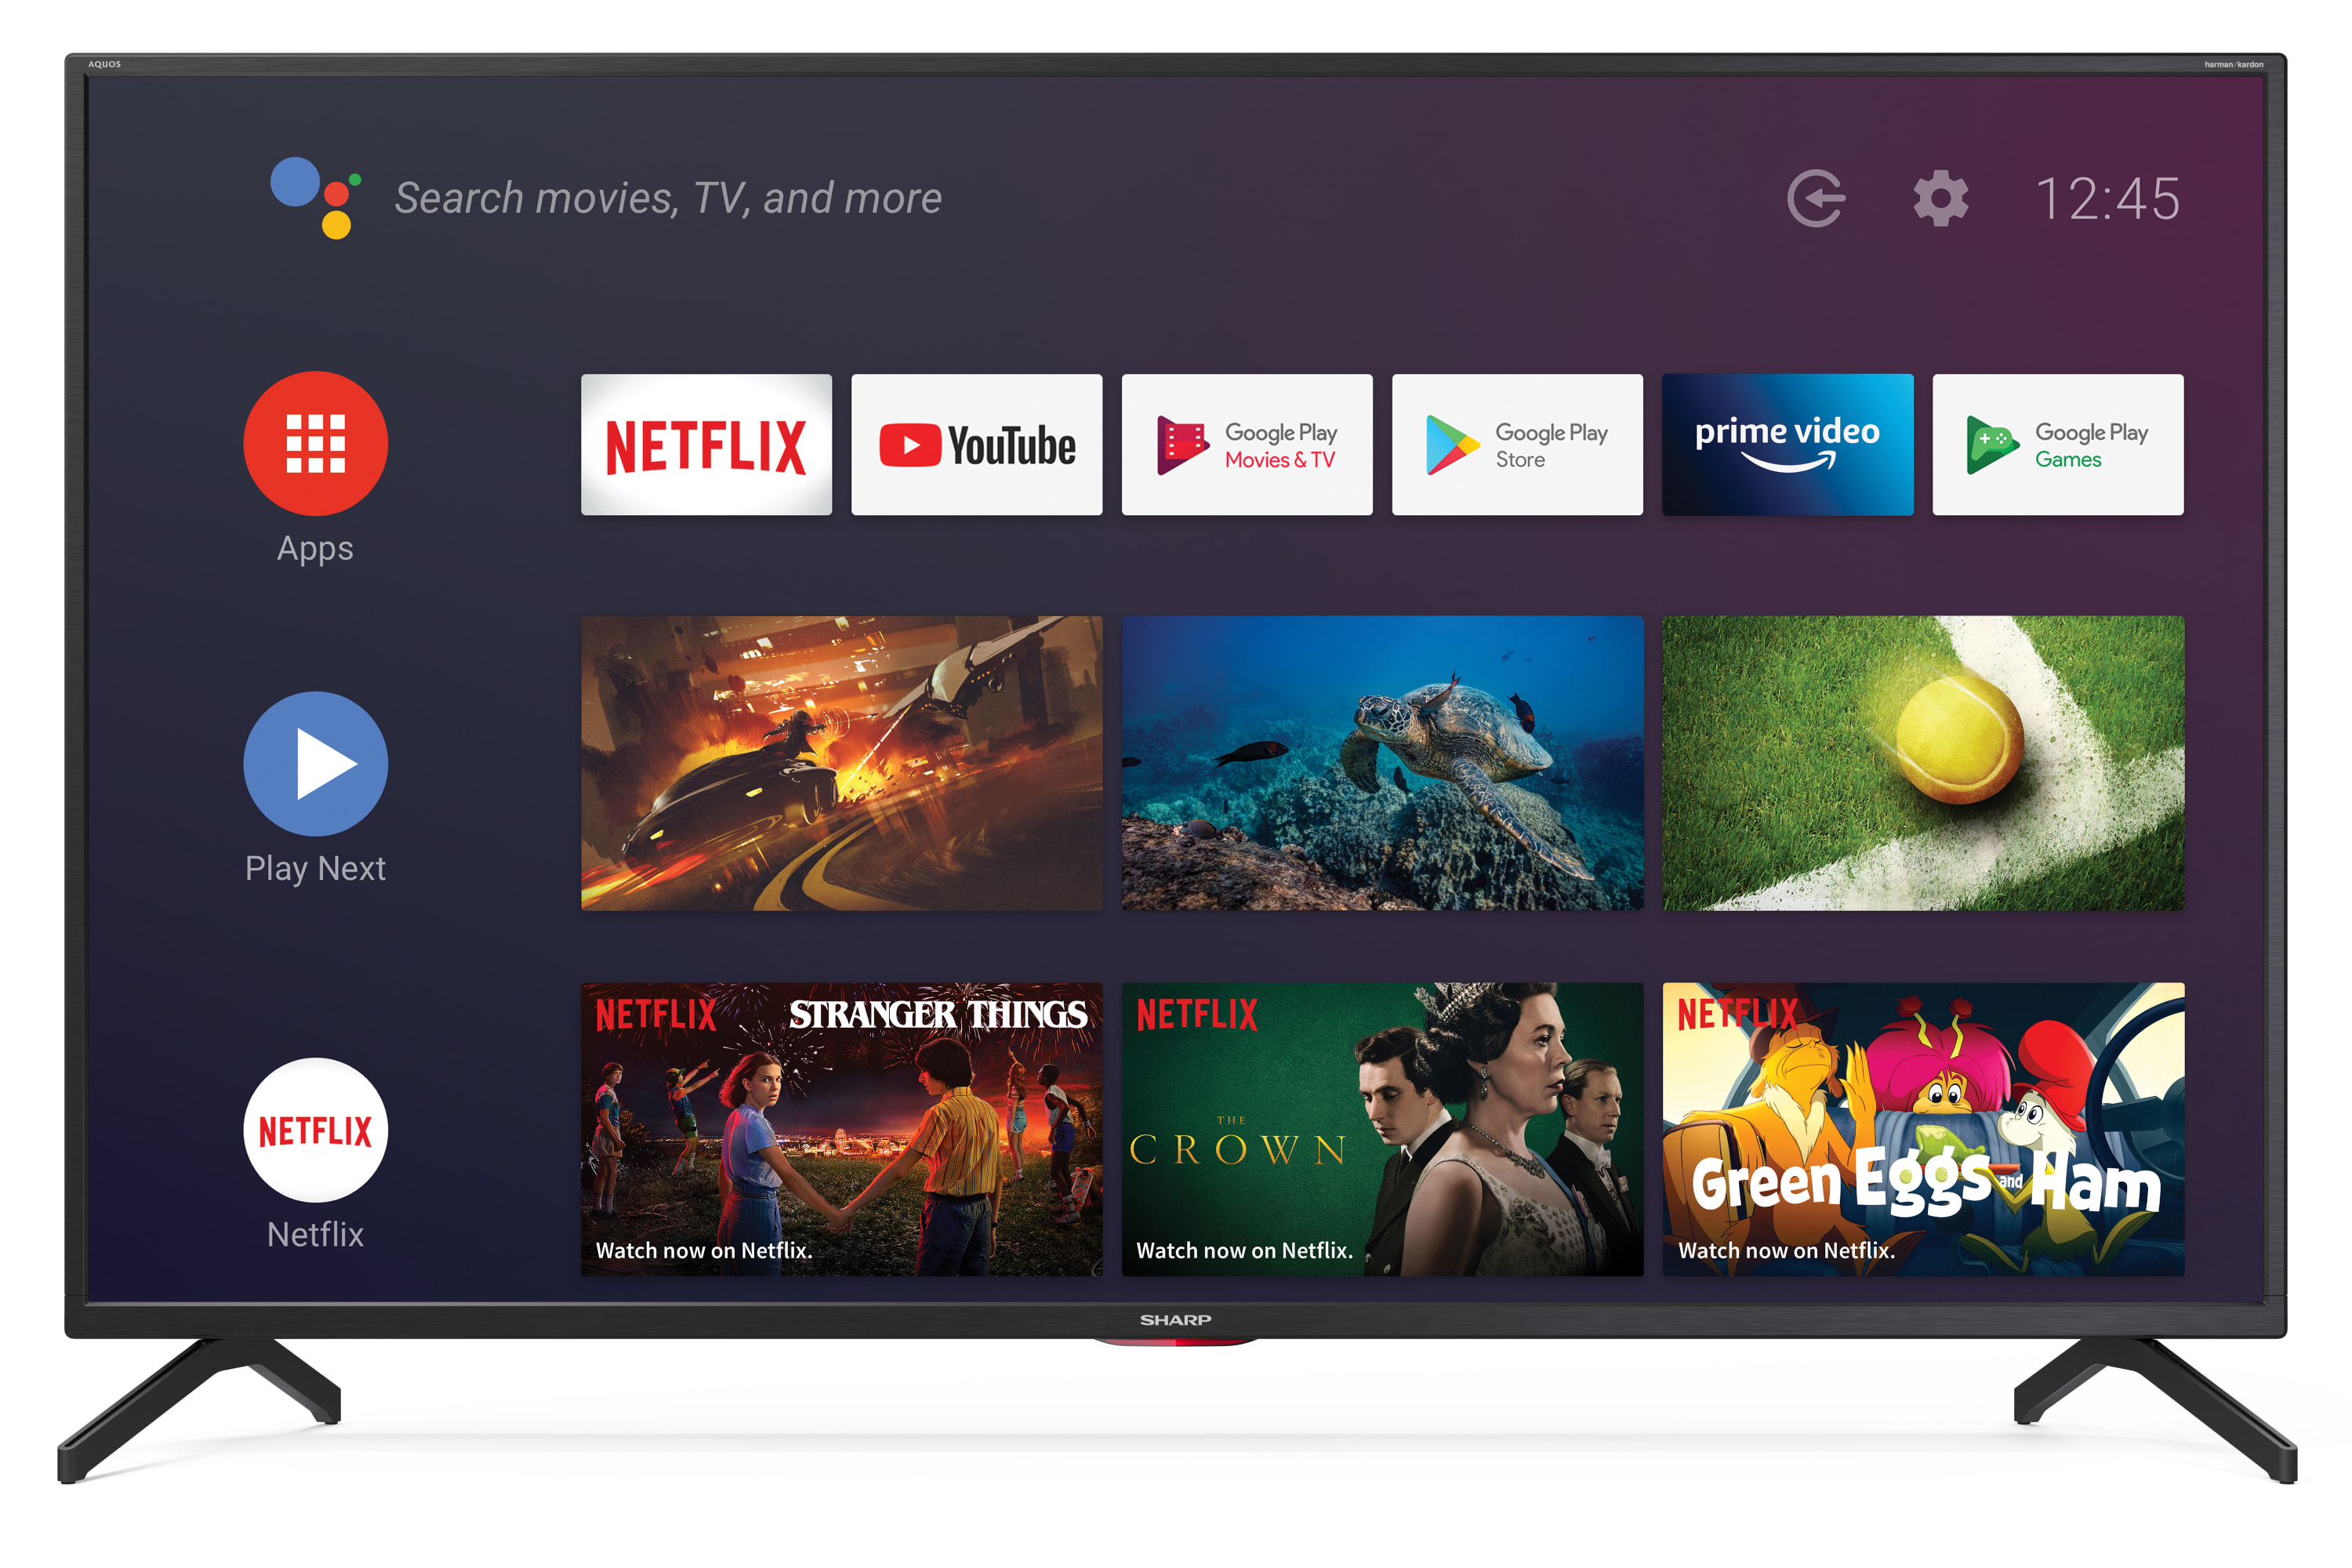 Android TV 4K UHD - 55" ANDROID TV™ ULTRA HD 4K